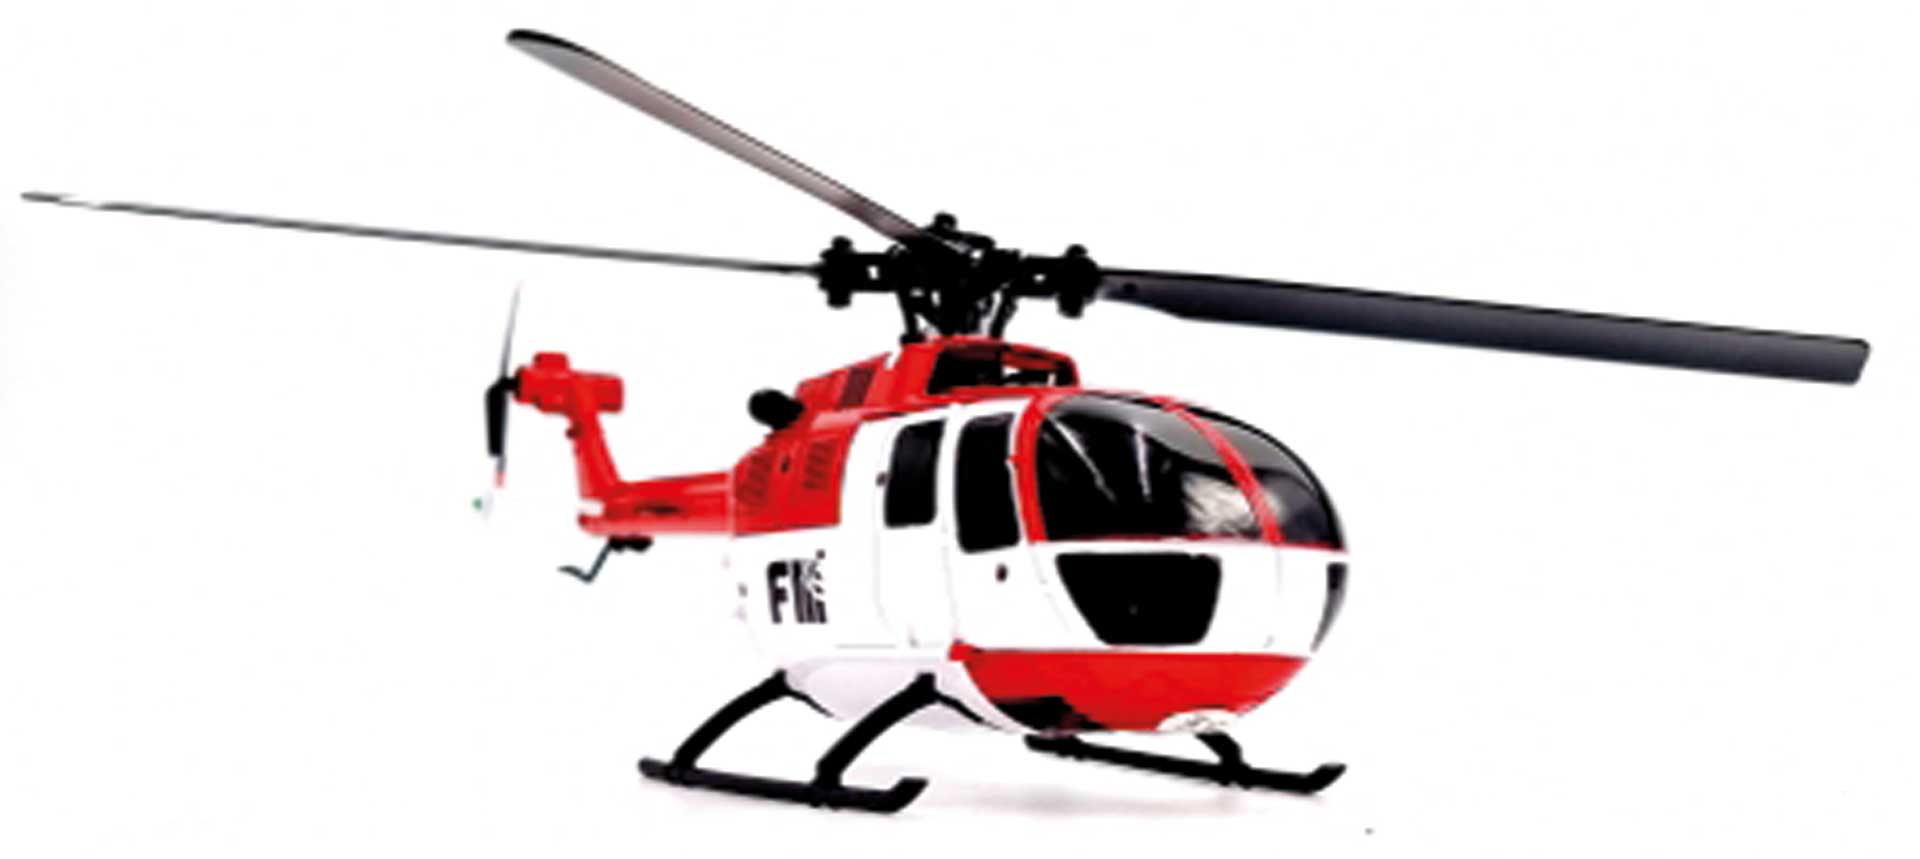 FM-ELECTRICS BO-105 Helicopter 4 channel RTF